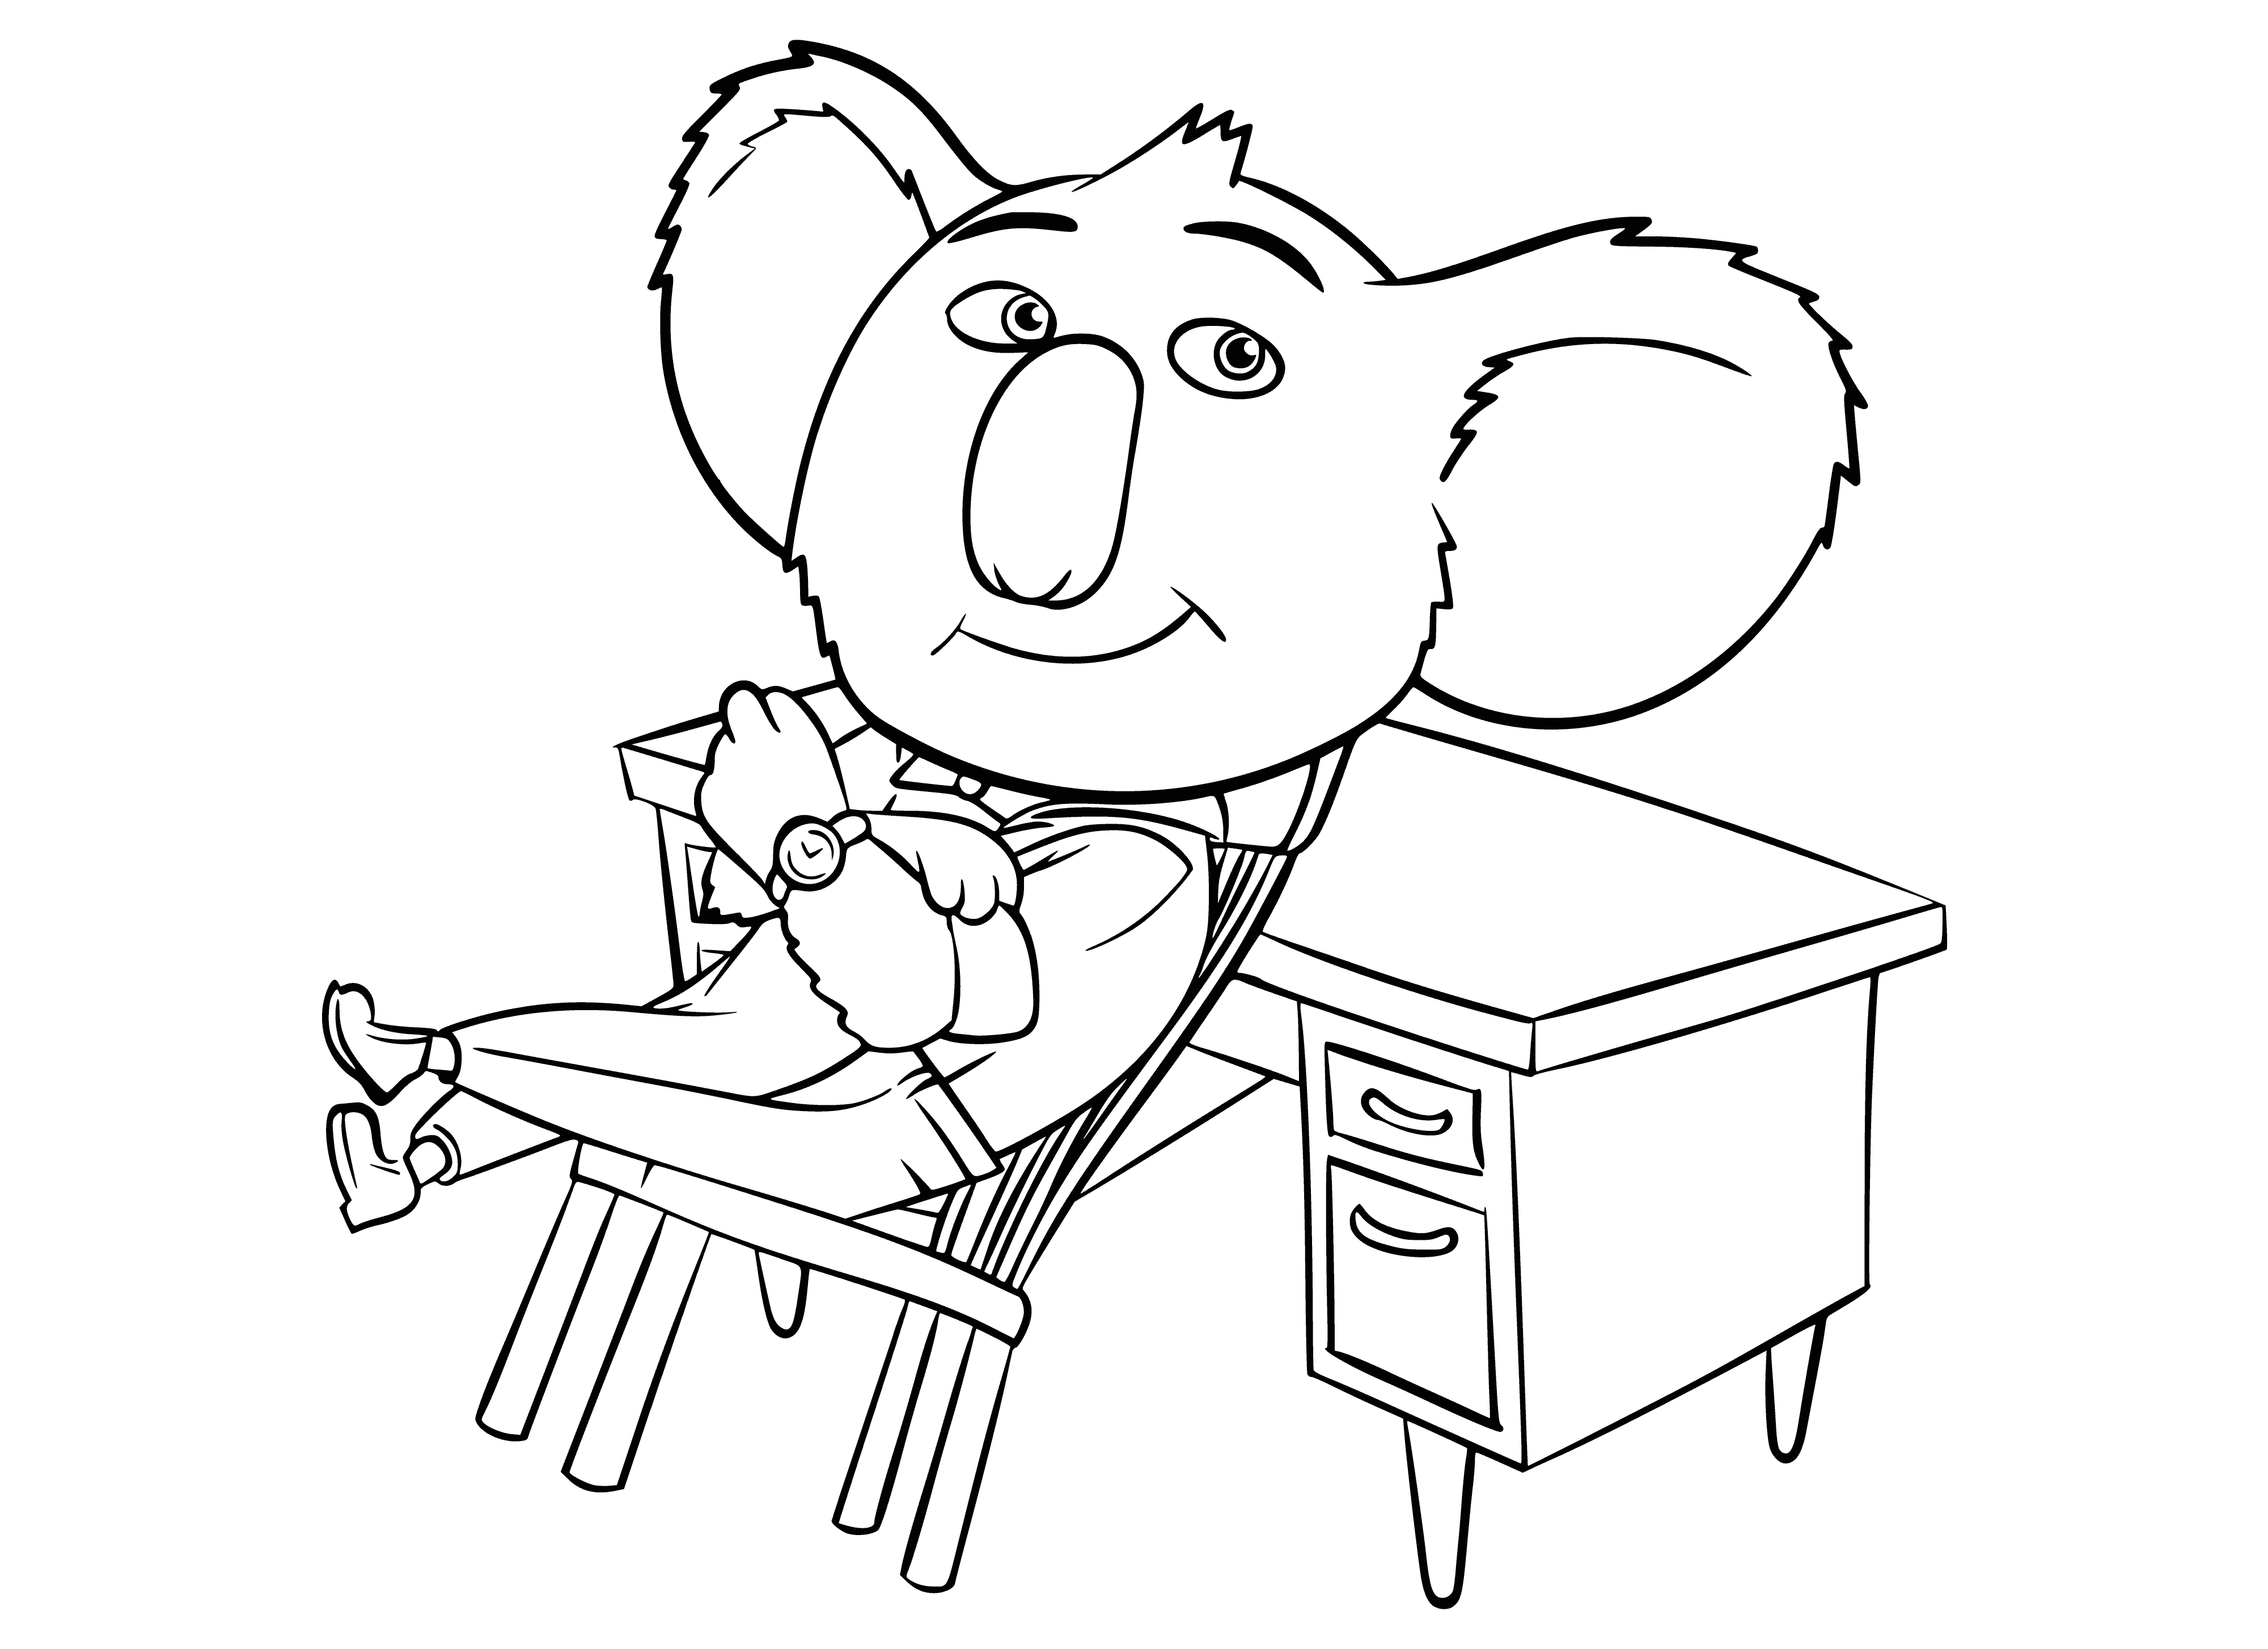 coloring page: Koala bear sits on branch, eating leaves with its paws. #Koala #Animals #Leaves